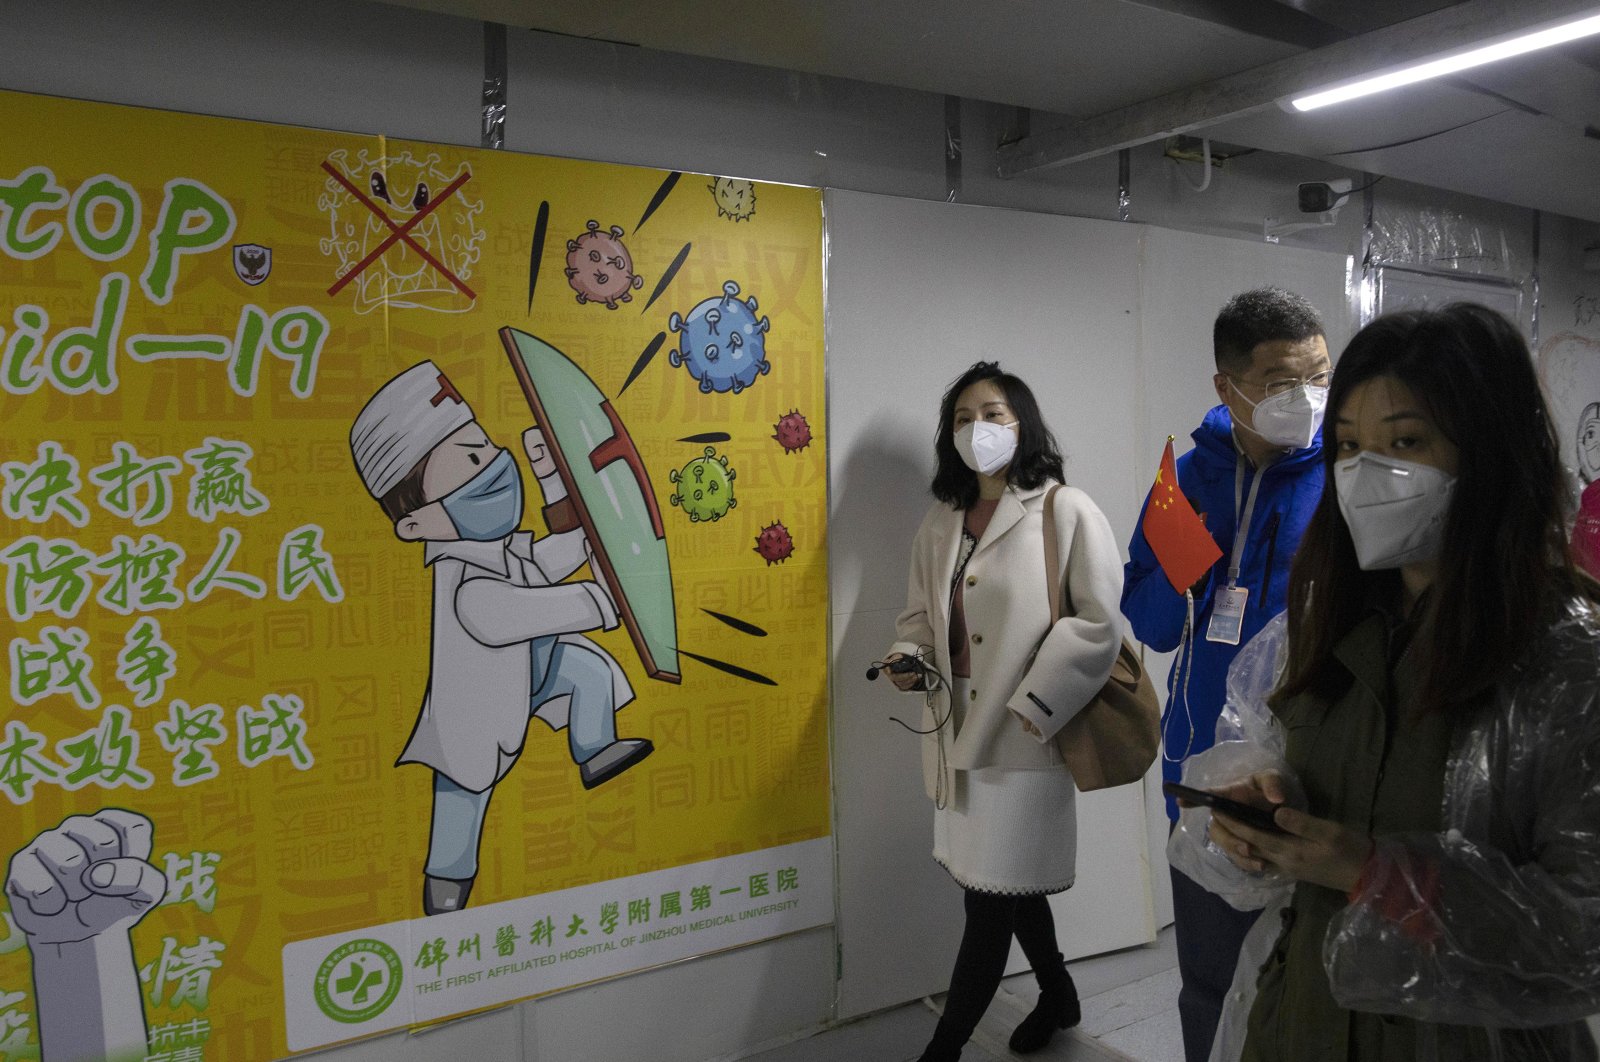 Visitors walk in the corridors of Leishenshan Hospital which was constructed in a parking lot from prefabricated modules in two weeks in Wuhan in central China's Hubei province, Saturday, April 11, 2020, as the city dealt with a rush of patients in the early days of the coronavirus outbreak. The hospital closed on April 9 but still has 14 patients, mainly elderly with underlying complications. (AP Photo)